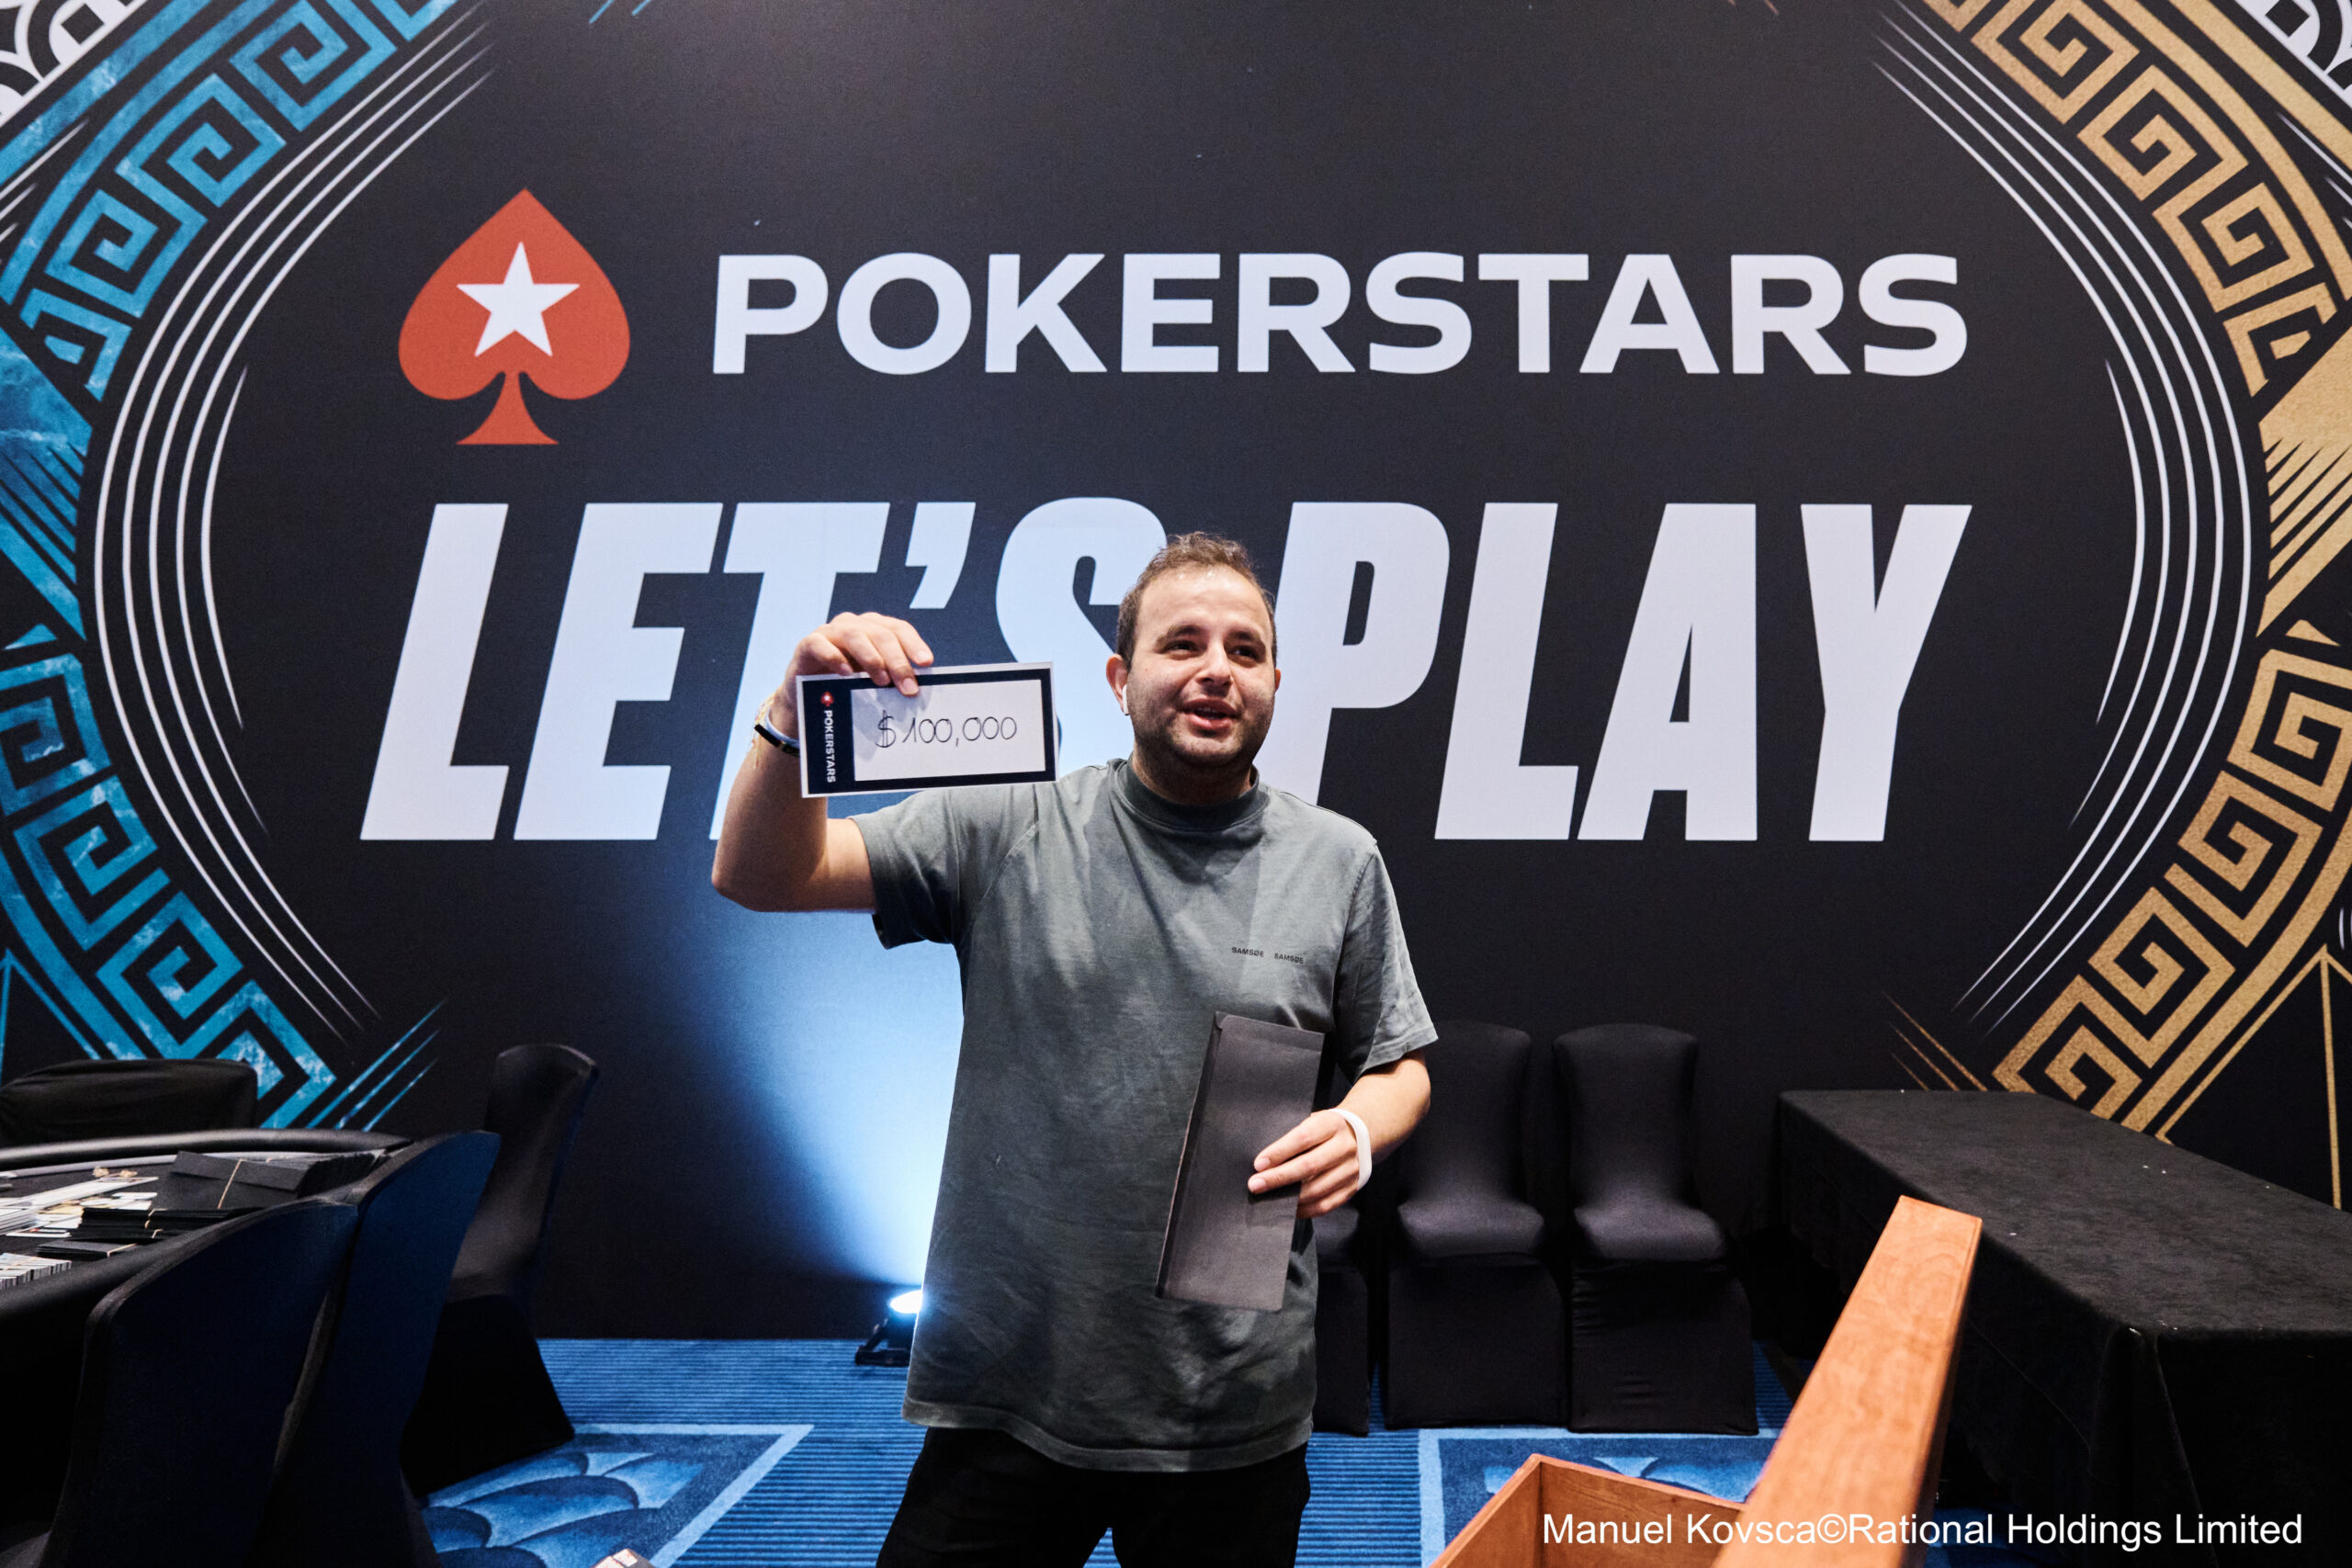 Mokri ran straight back to his table after winning $100K